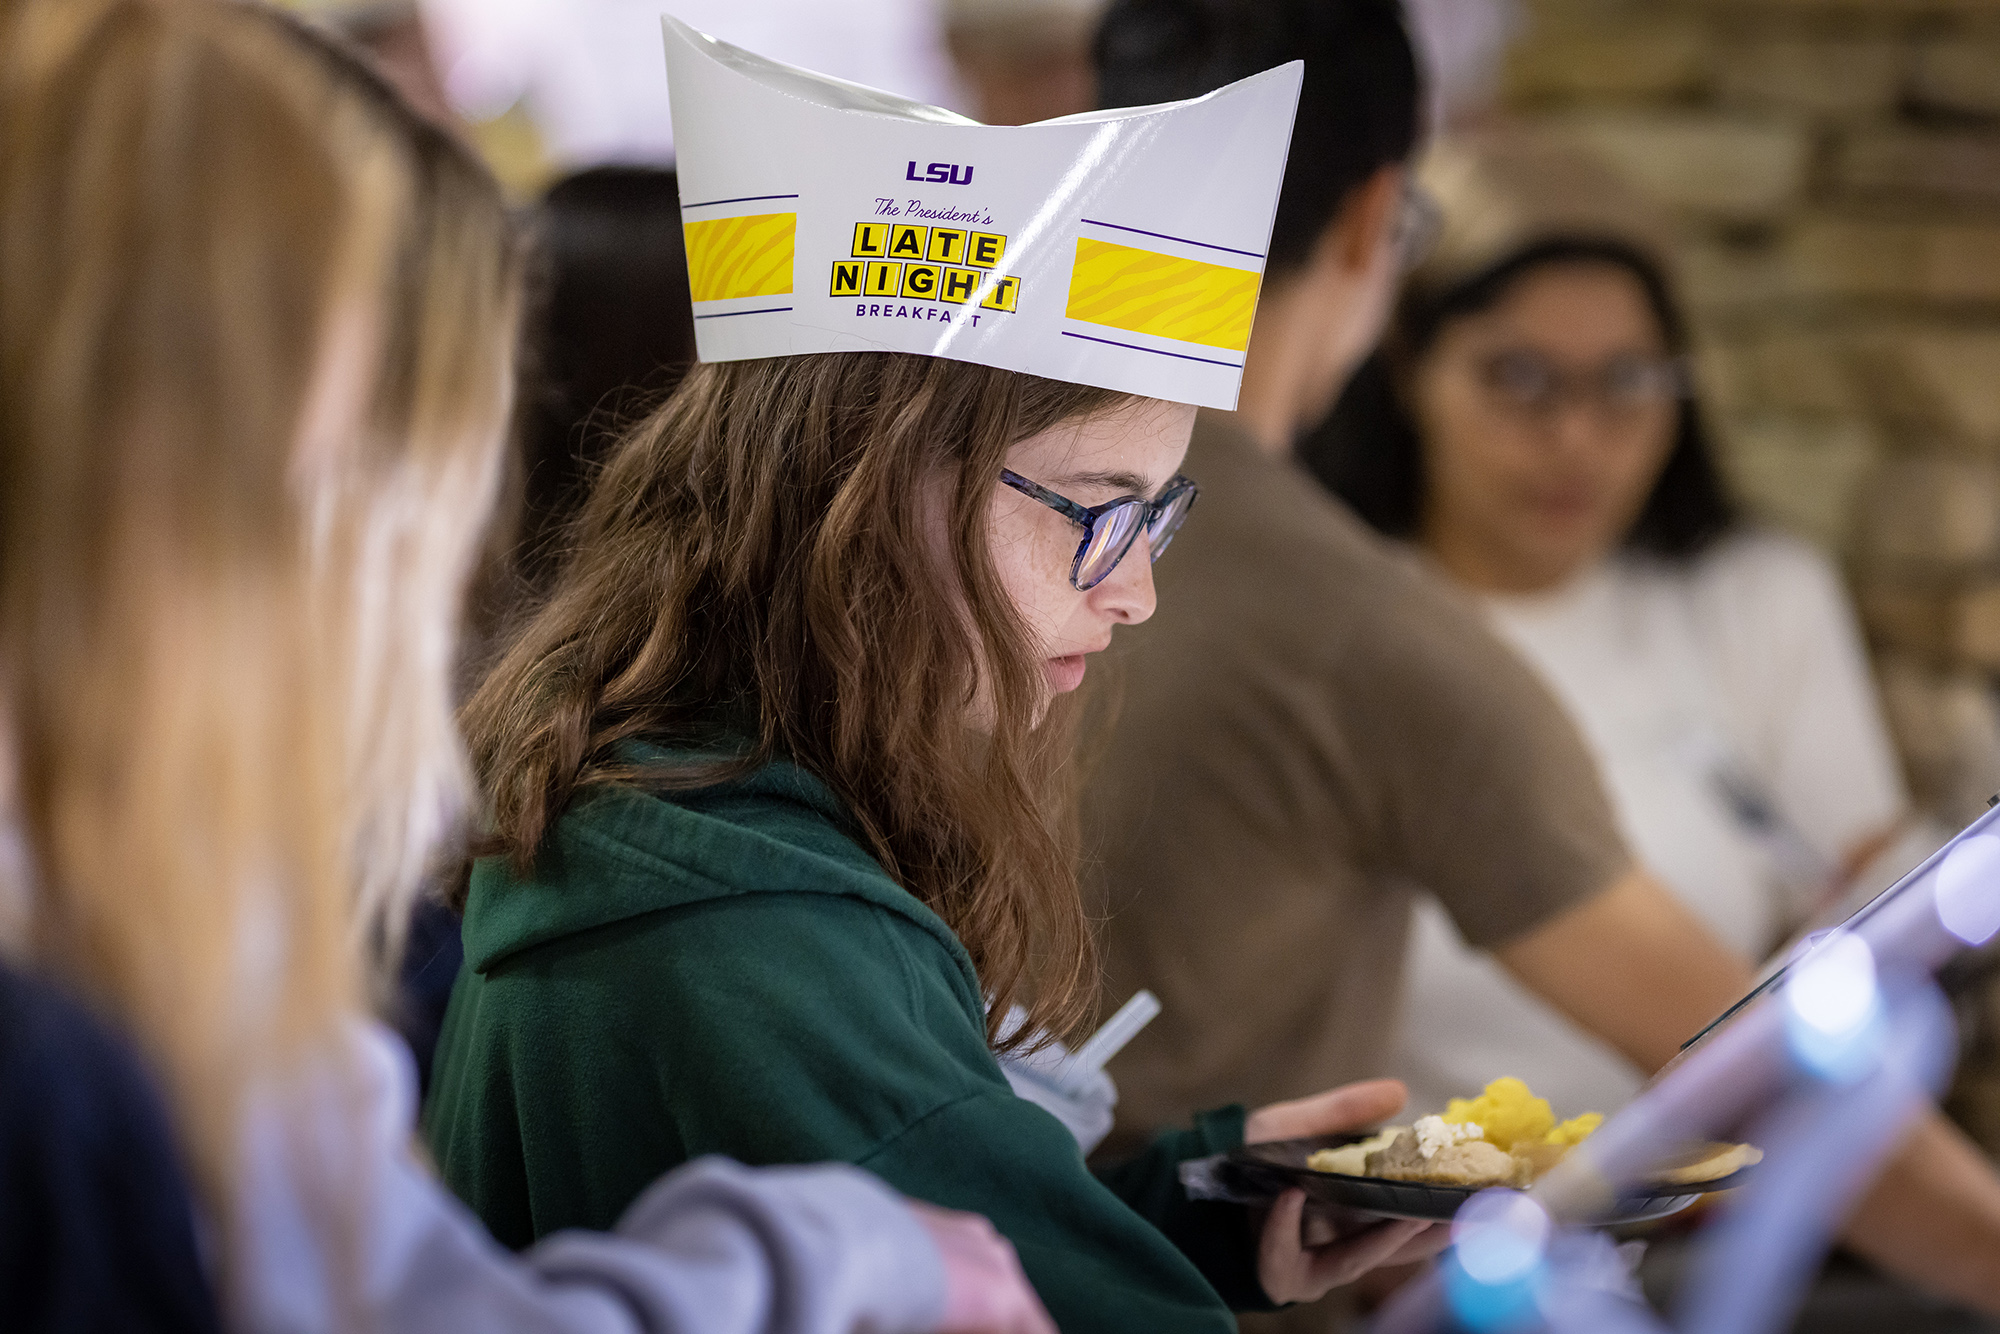 LSU student fixes a plate of food at the President's Late Night Breakfast